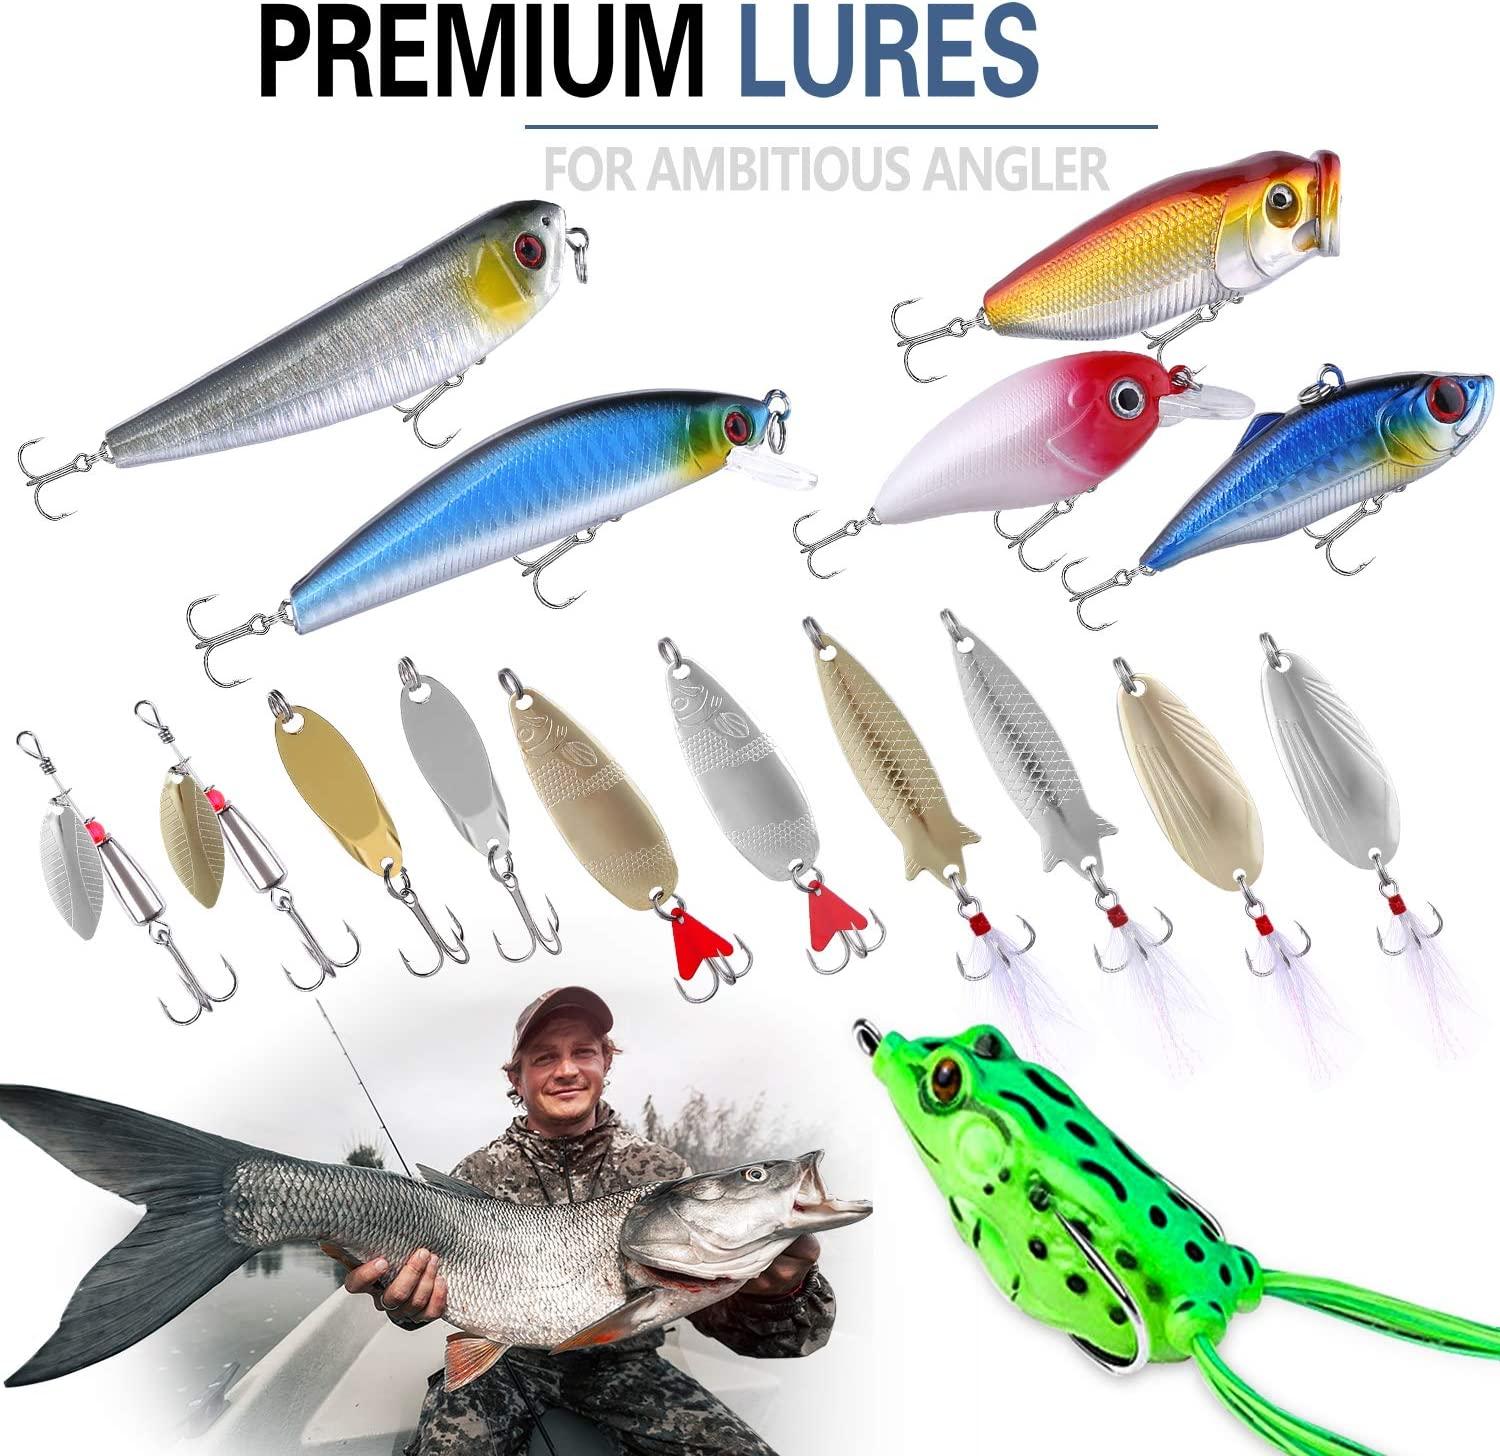 PLUSINNO Fishing Lures Baits Tackle Including Crankbaits, Spinnerbaits,  Plastic Worms, Jigs, Topwater Lures, Tackle Box and More Fishing Gear Lures  Kit Set,Fish…